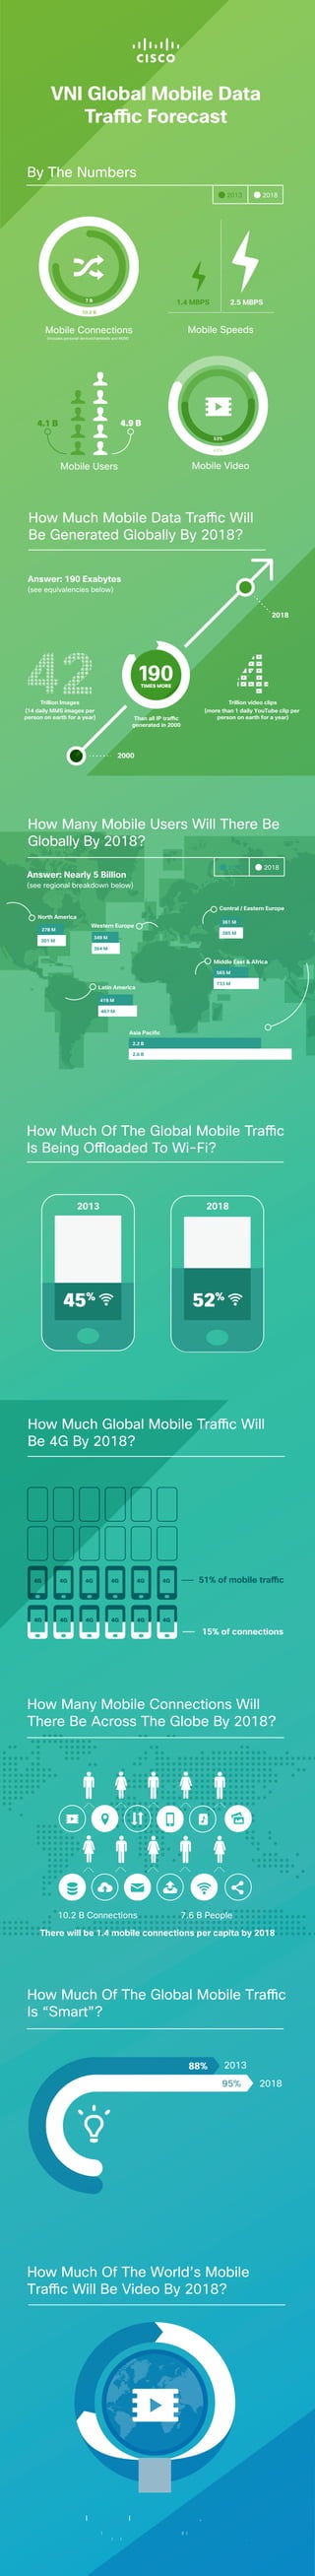 VNI Global Mobile Data

By The Numbers
2013

7B

1.4 MBPS

2018

2.5 MBPS

10.2 B

Mobile Speeds

Mobile Connections
(includes personal devices/handsets and M2M)

4.9 B

4.1 B

5 3%

69%

Mobile Video

Mobile Users

How Much Mobile Data Traffic Will
Be Generated Globally By 2018?
Answer: 190 Exabytes
(see equivalencies below)

2018

TIMES MORE

Trillion Images
(14 daily MMS images per
person on earth for a year)

Trillion video clips
(more than 1 daily YouTube clip per
person on earth for a year)
generated in 2000

2000

How Many Mobile Users Will There Be
Globally By 2018?
2013

Answer: Nearly 5 Billion

2018

(see regional breakdown below)
Central / Eastern Europe
North America

361 M

Western Europe

278 M

385 M

349 M

301 M

364 M

Middle East & Africa
565 M
733 M

Latin America
419 M
467 M

2.2 B
2.6 B

How Much Of The Global Mobile Traffic
Is Being Offloaded To Wi-Fi?

2018

2013

45%

52%

Be 4G By 2018?

4G

4G

4G

4G

4G

4G

4G

4G

4G

4G

4G

4G

15% of connections

How Many Mobile Connections Will
There Be Across The Globe By 2018?

10.2 B Connections

7.6 B People

There will be 1.4 mobile connections per capita by 2018

How Much Of The Global Mobile Traffic
Is “Smart”?

88%

2013
95%

How Much Of The World’s Mobile
Traffic Will Be Video By 2018?

#VNI #CiscoMobility

http://cisco.com/go/vni

Independent study conducted over cellular network
Estimated number of global iPhone users as of January 2013 per independent reports.

2018

 